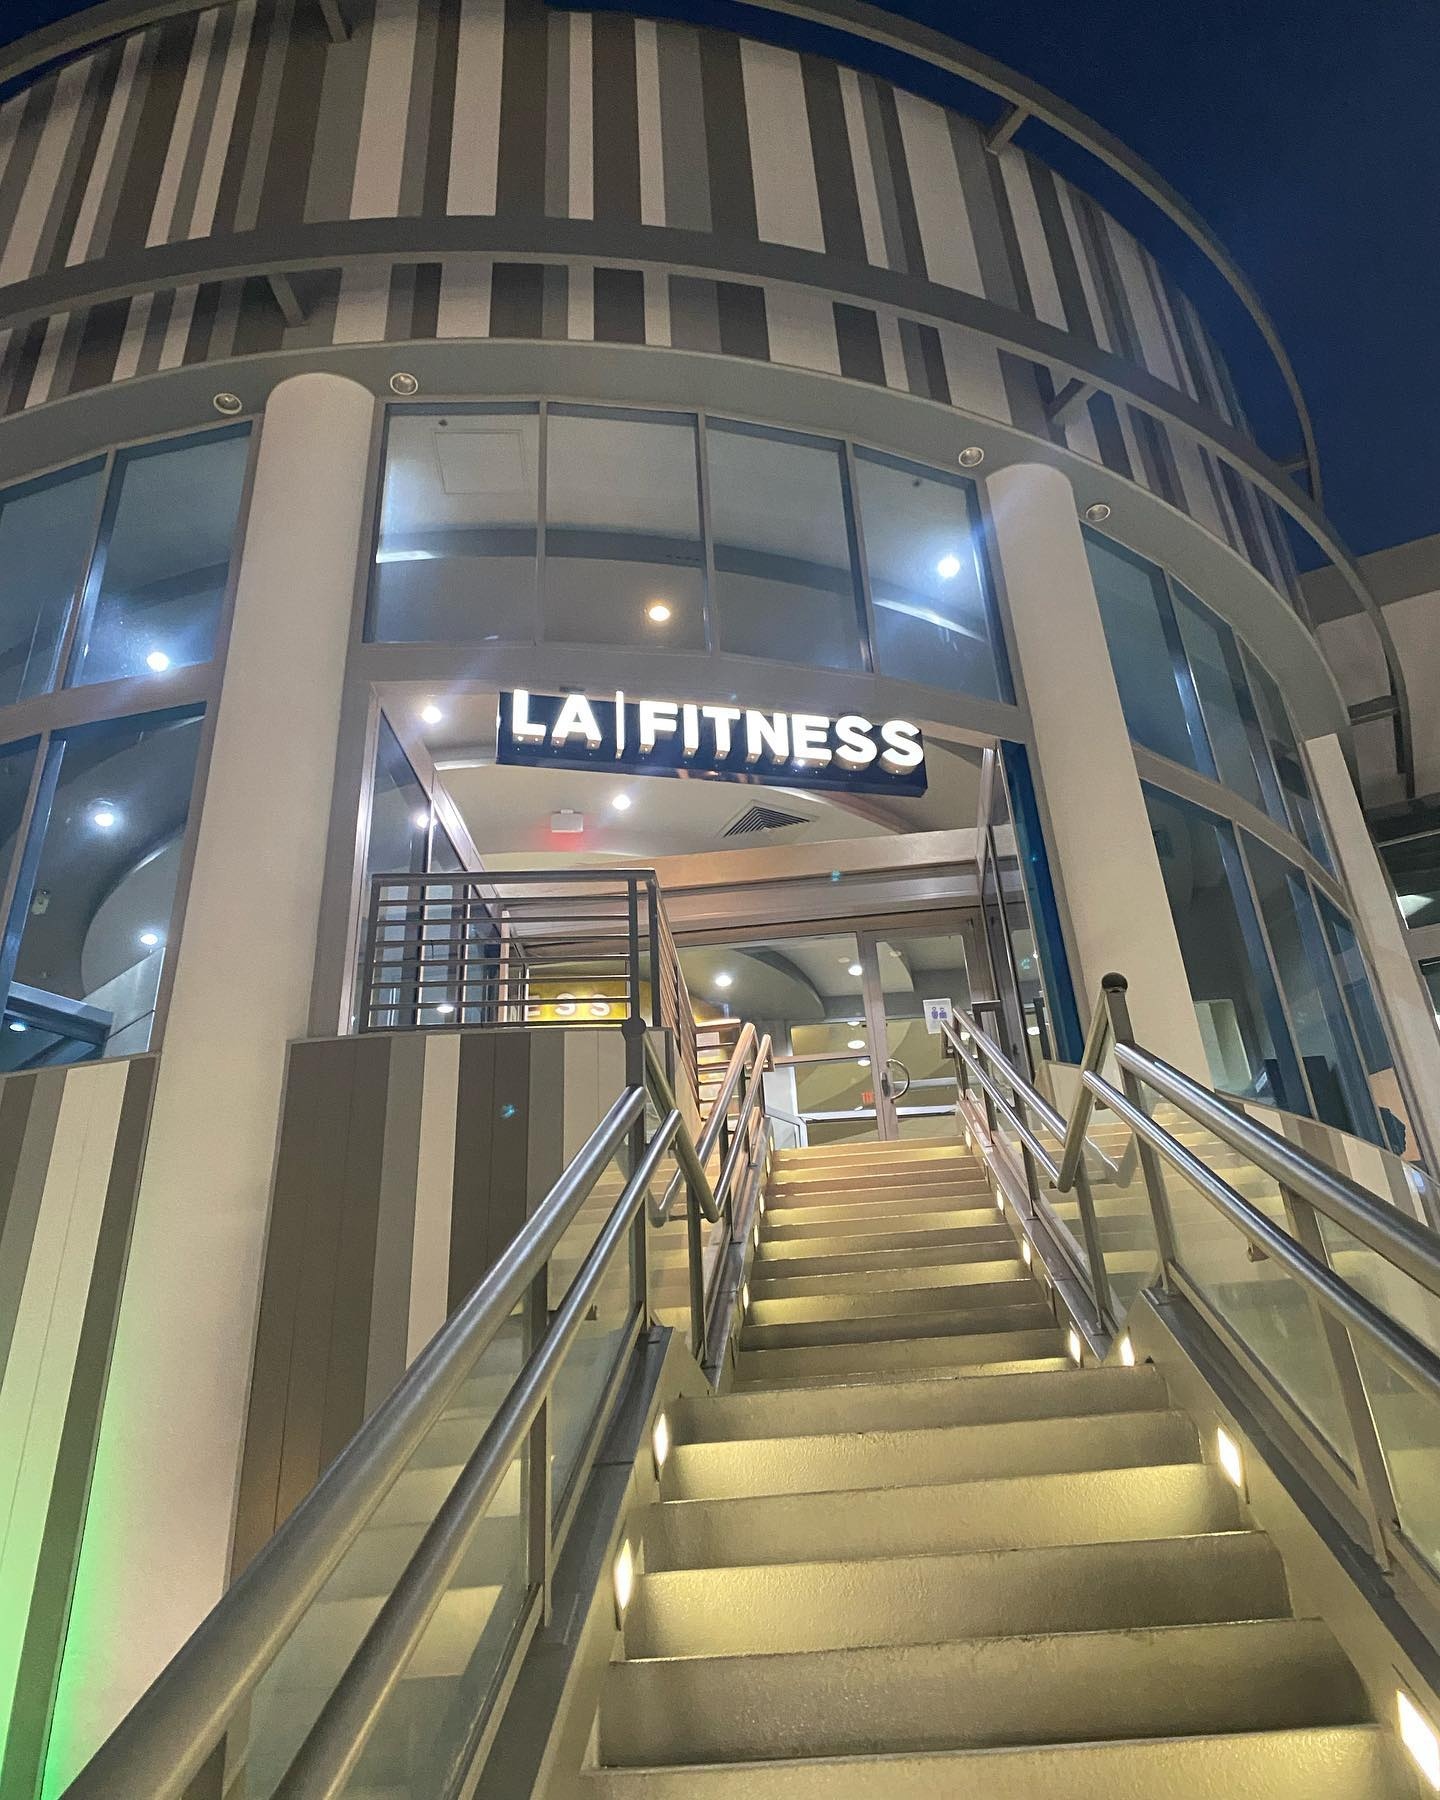 LA Fitness on X: If it's the hard choice, it's the right choice. ❤️ =  agree. #climbhigher 📷 @scrindles #lafitnesslifestyle #lafitness #fitness # workout #motivation #training #gym #health #fitfam #fitnessmotivation #fit # exercise